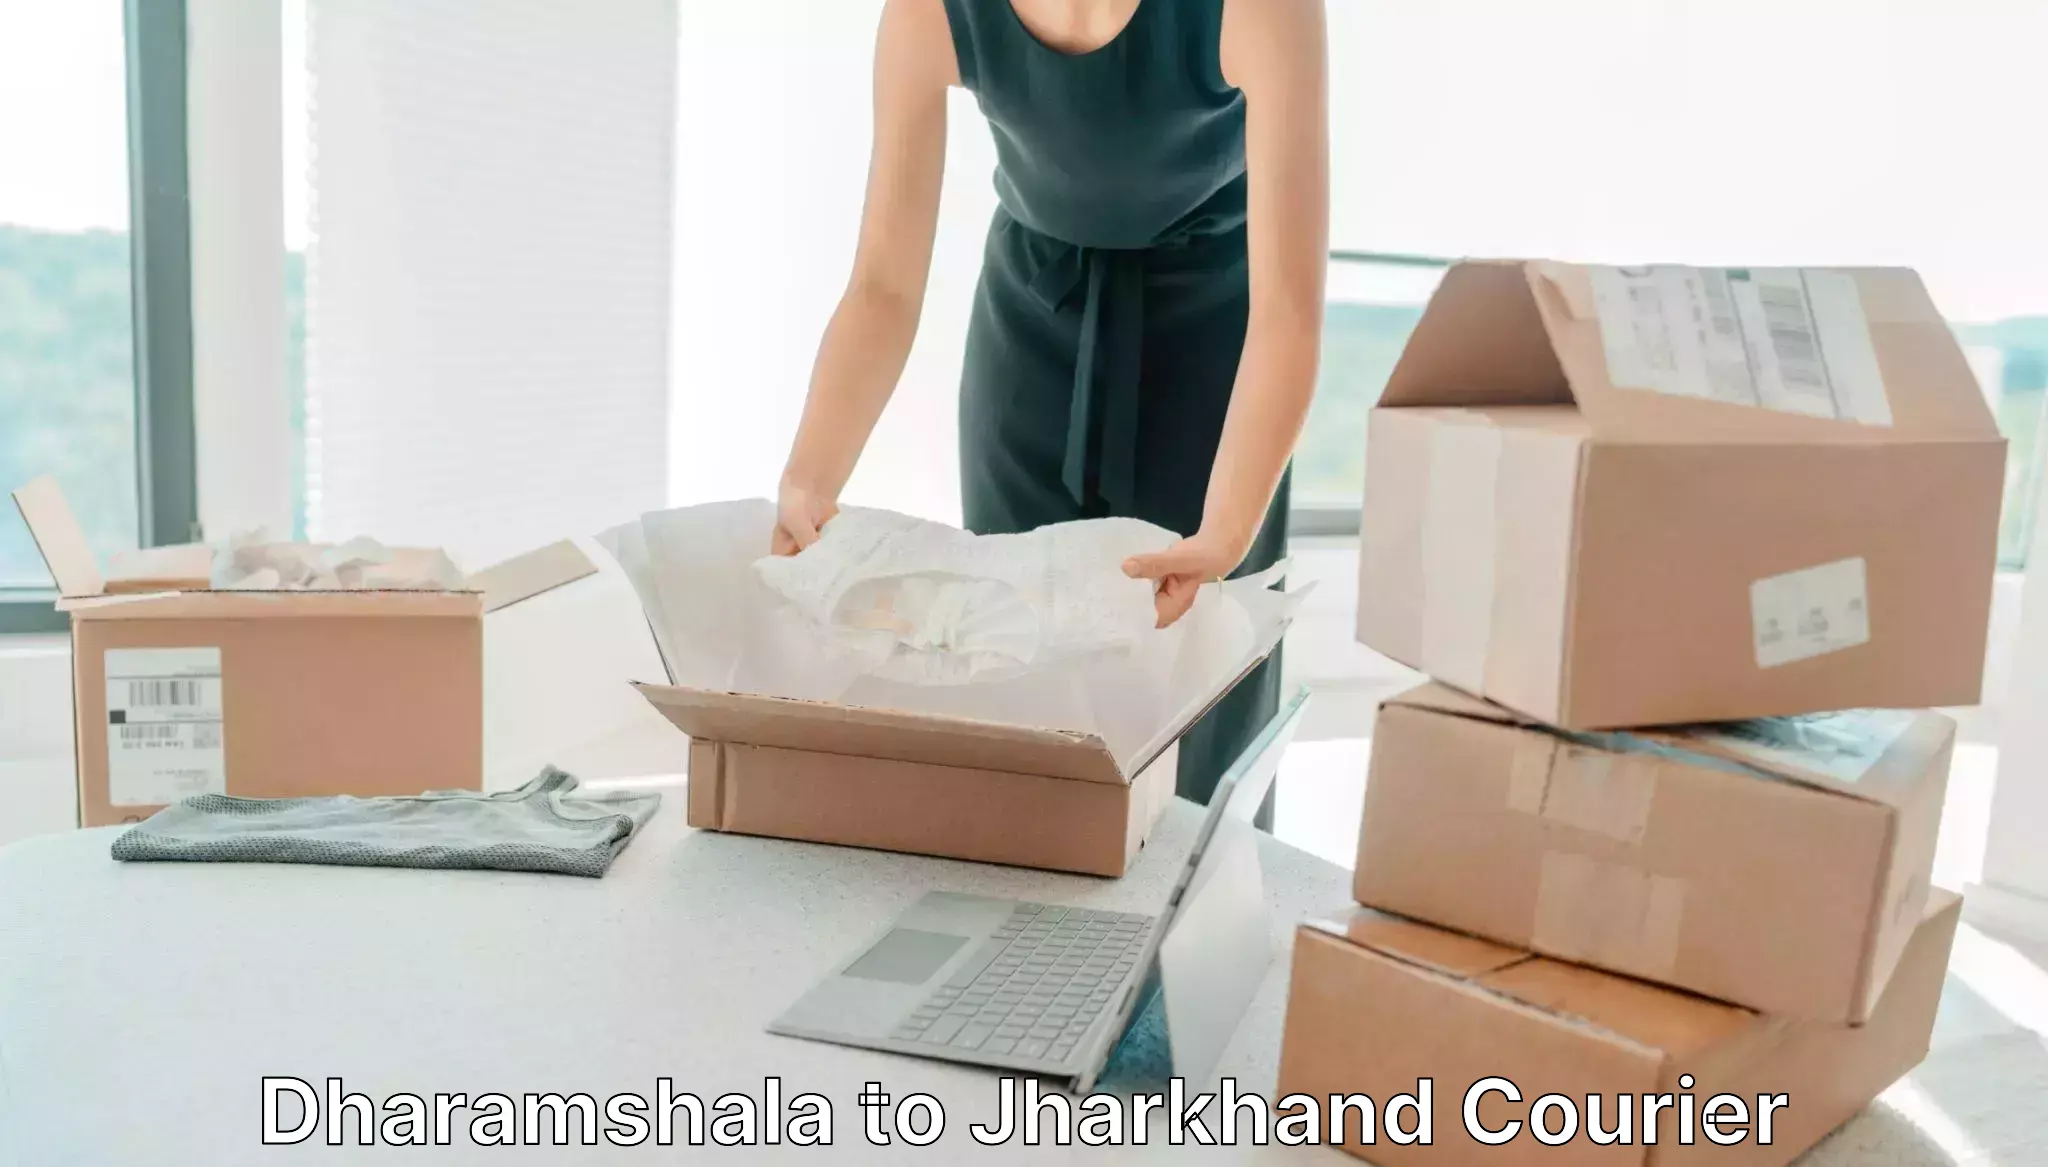 Urgent courier needs Dharamshala to Bara Boarijor